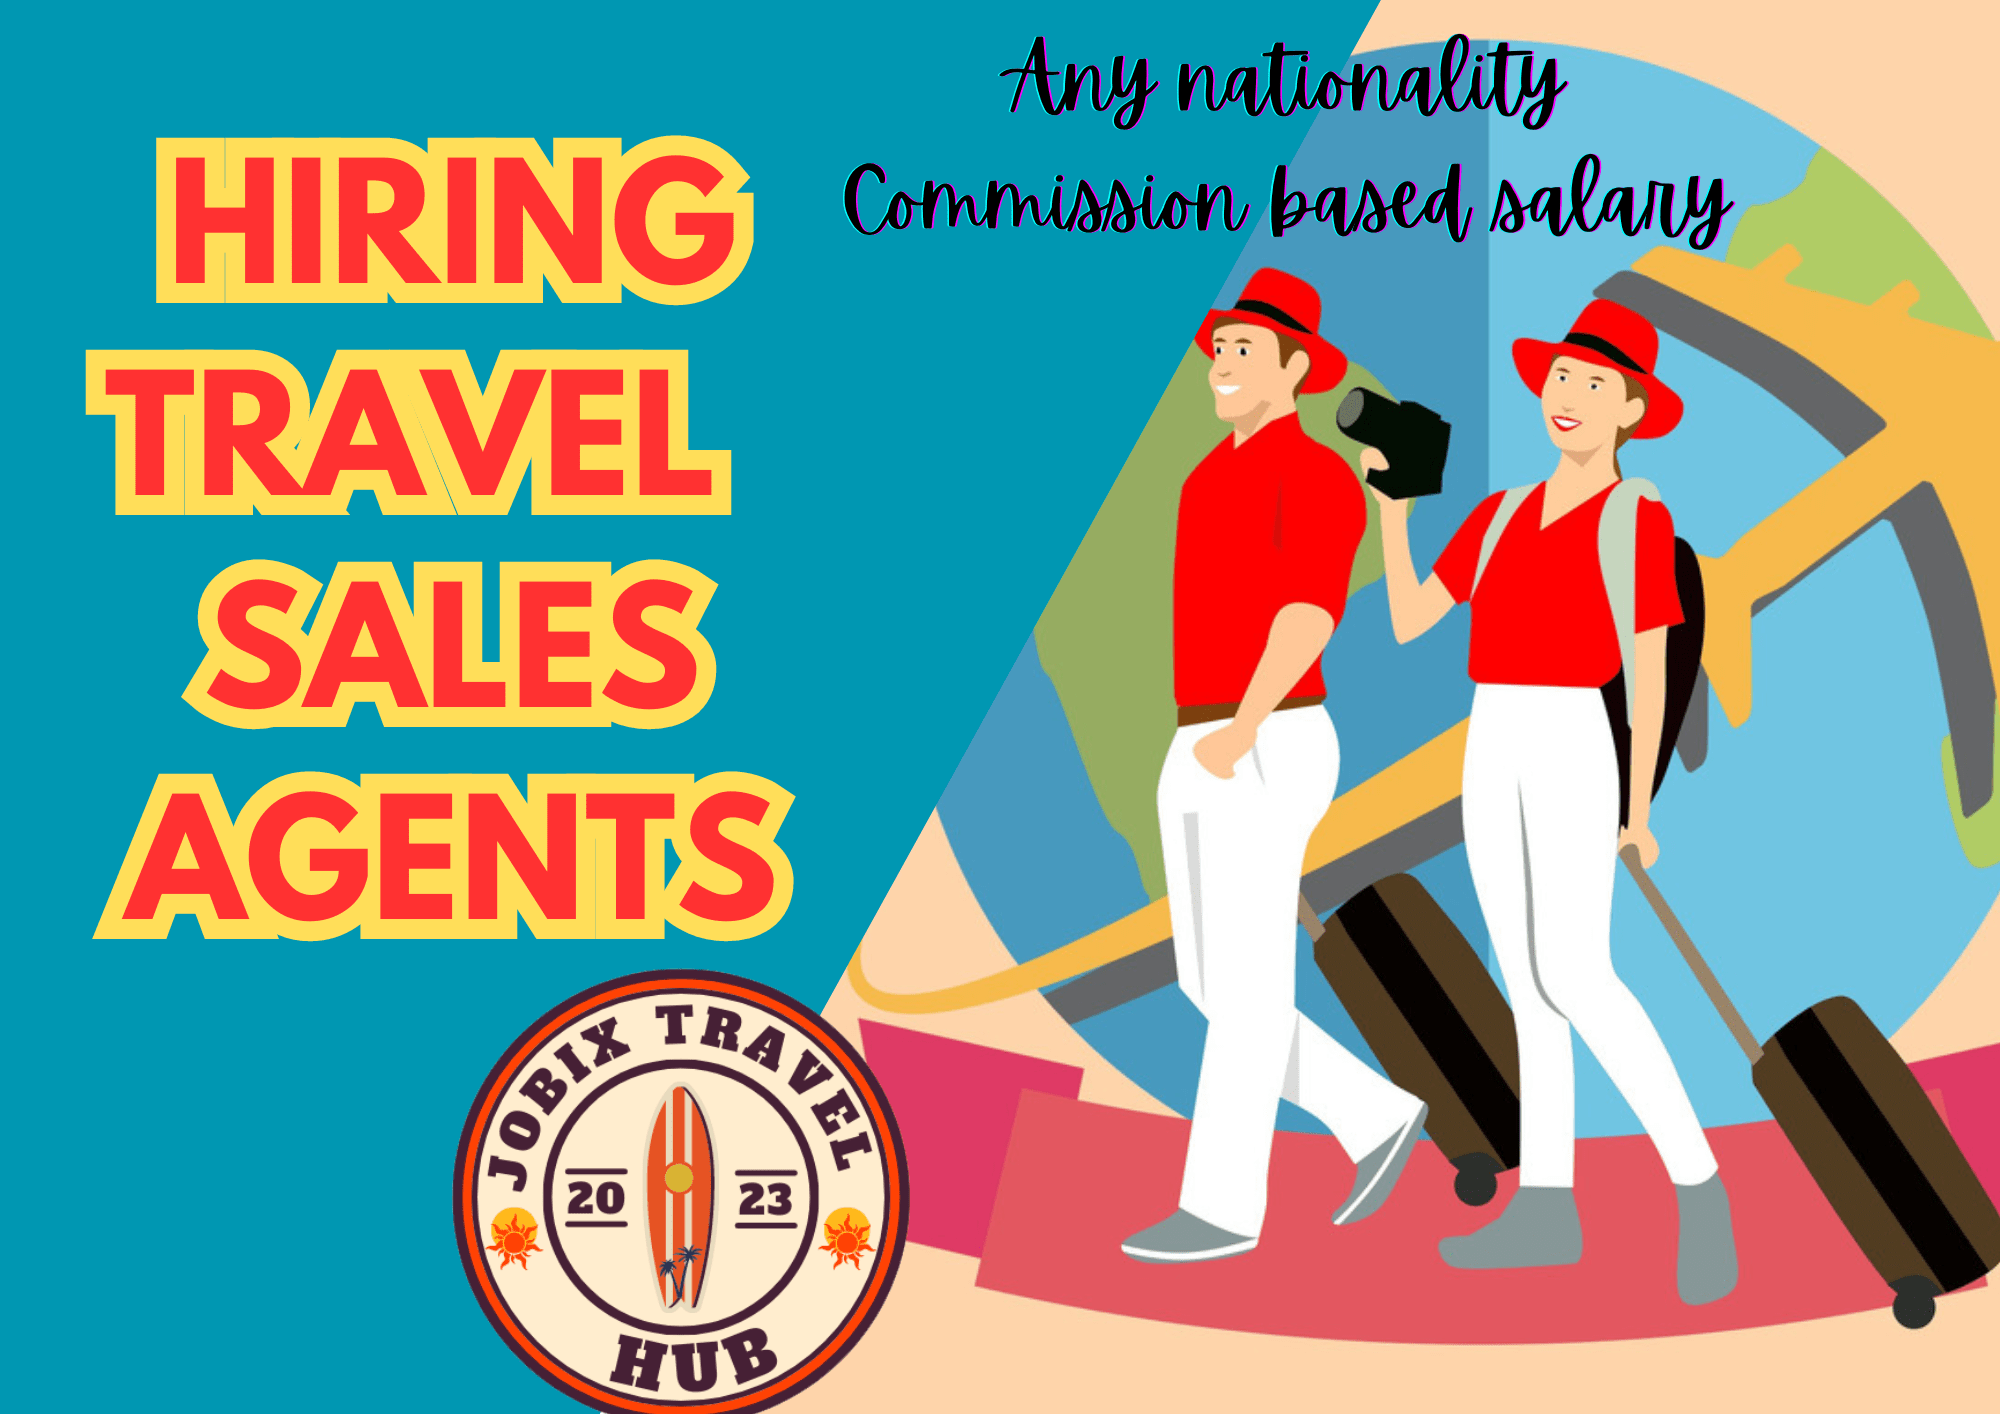 Freelance Jobs Anywhere. Jobs for any nationality. Remote jobs worldwide. Remote Jobs Anywhere. Travel Sales Agents Hiring